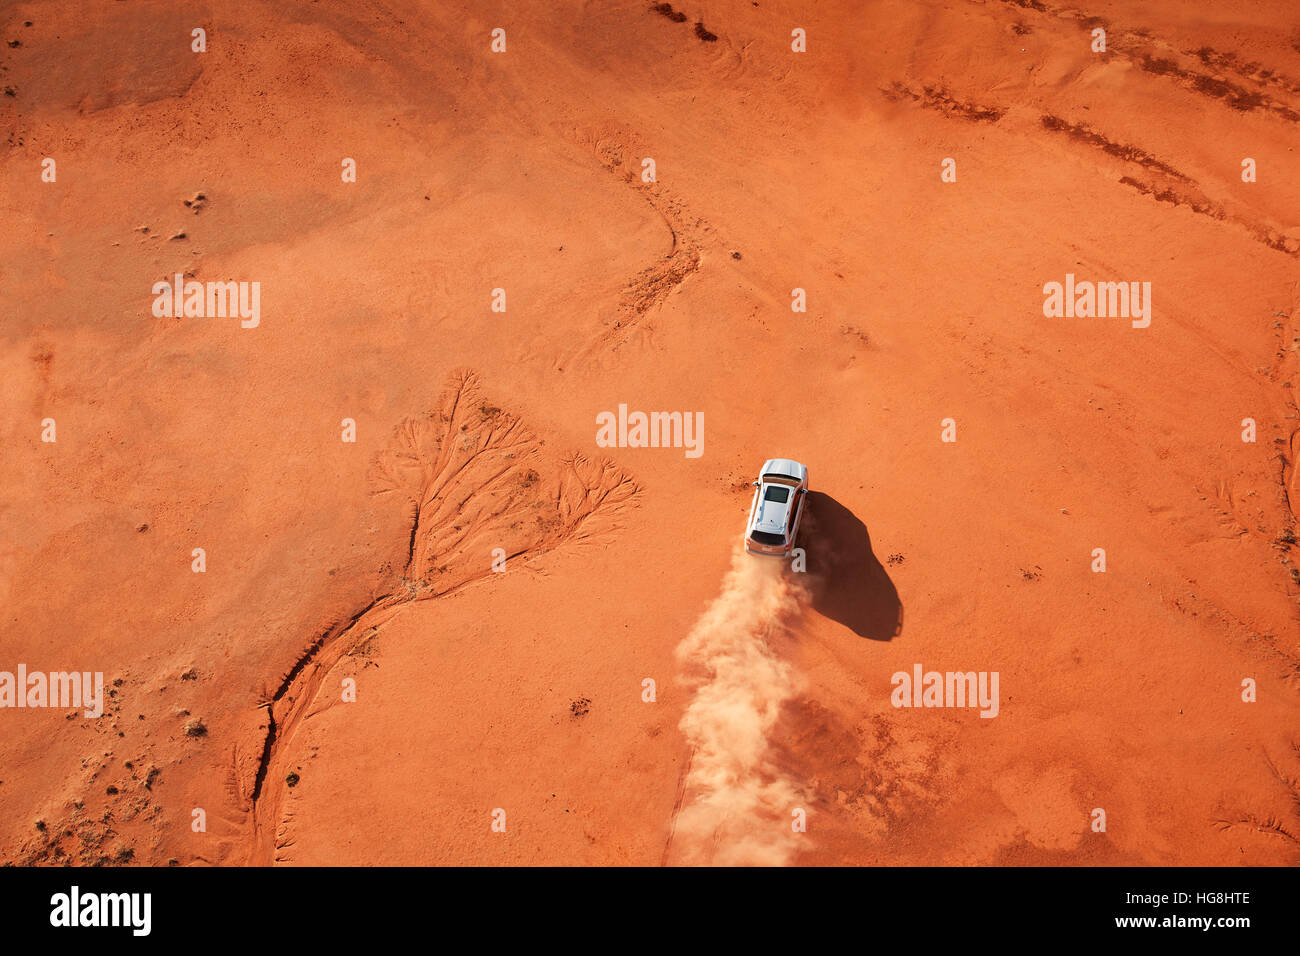 Bird's eye view looking over a car driving through the Australian outback red desert Stock Photo